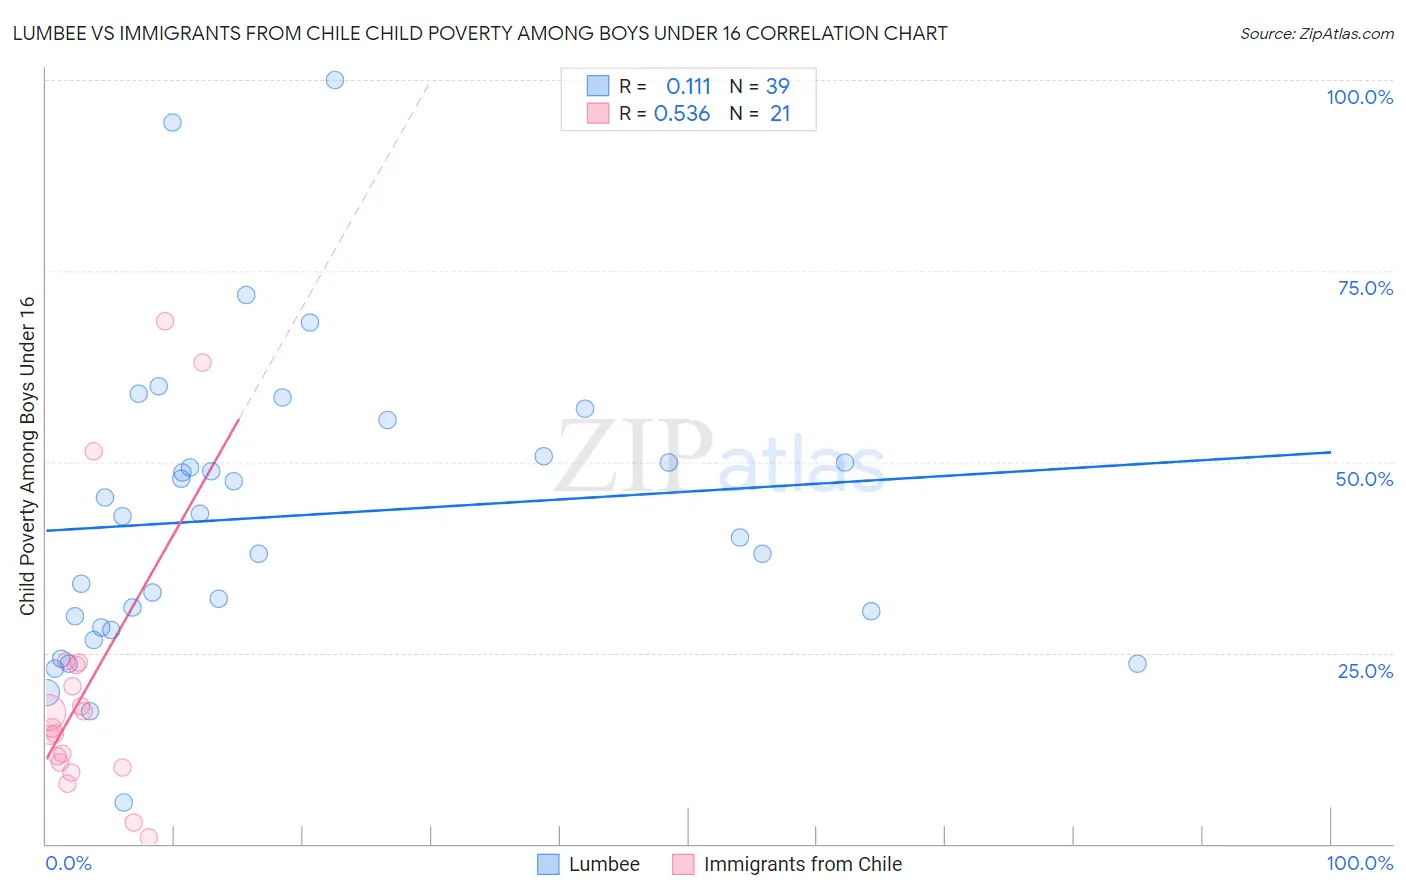 Lumbee vs Immigrants from Chile Child Poverty Among Boys Under 16